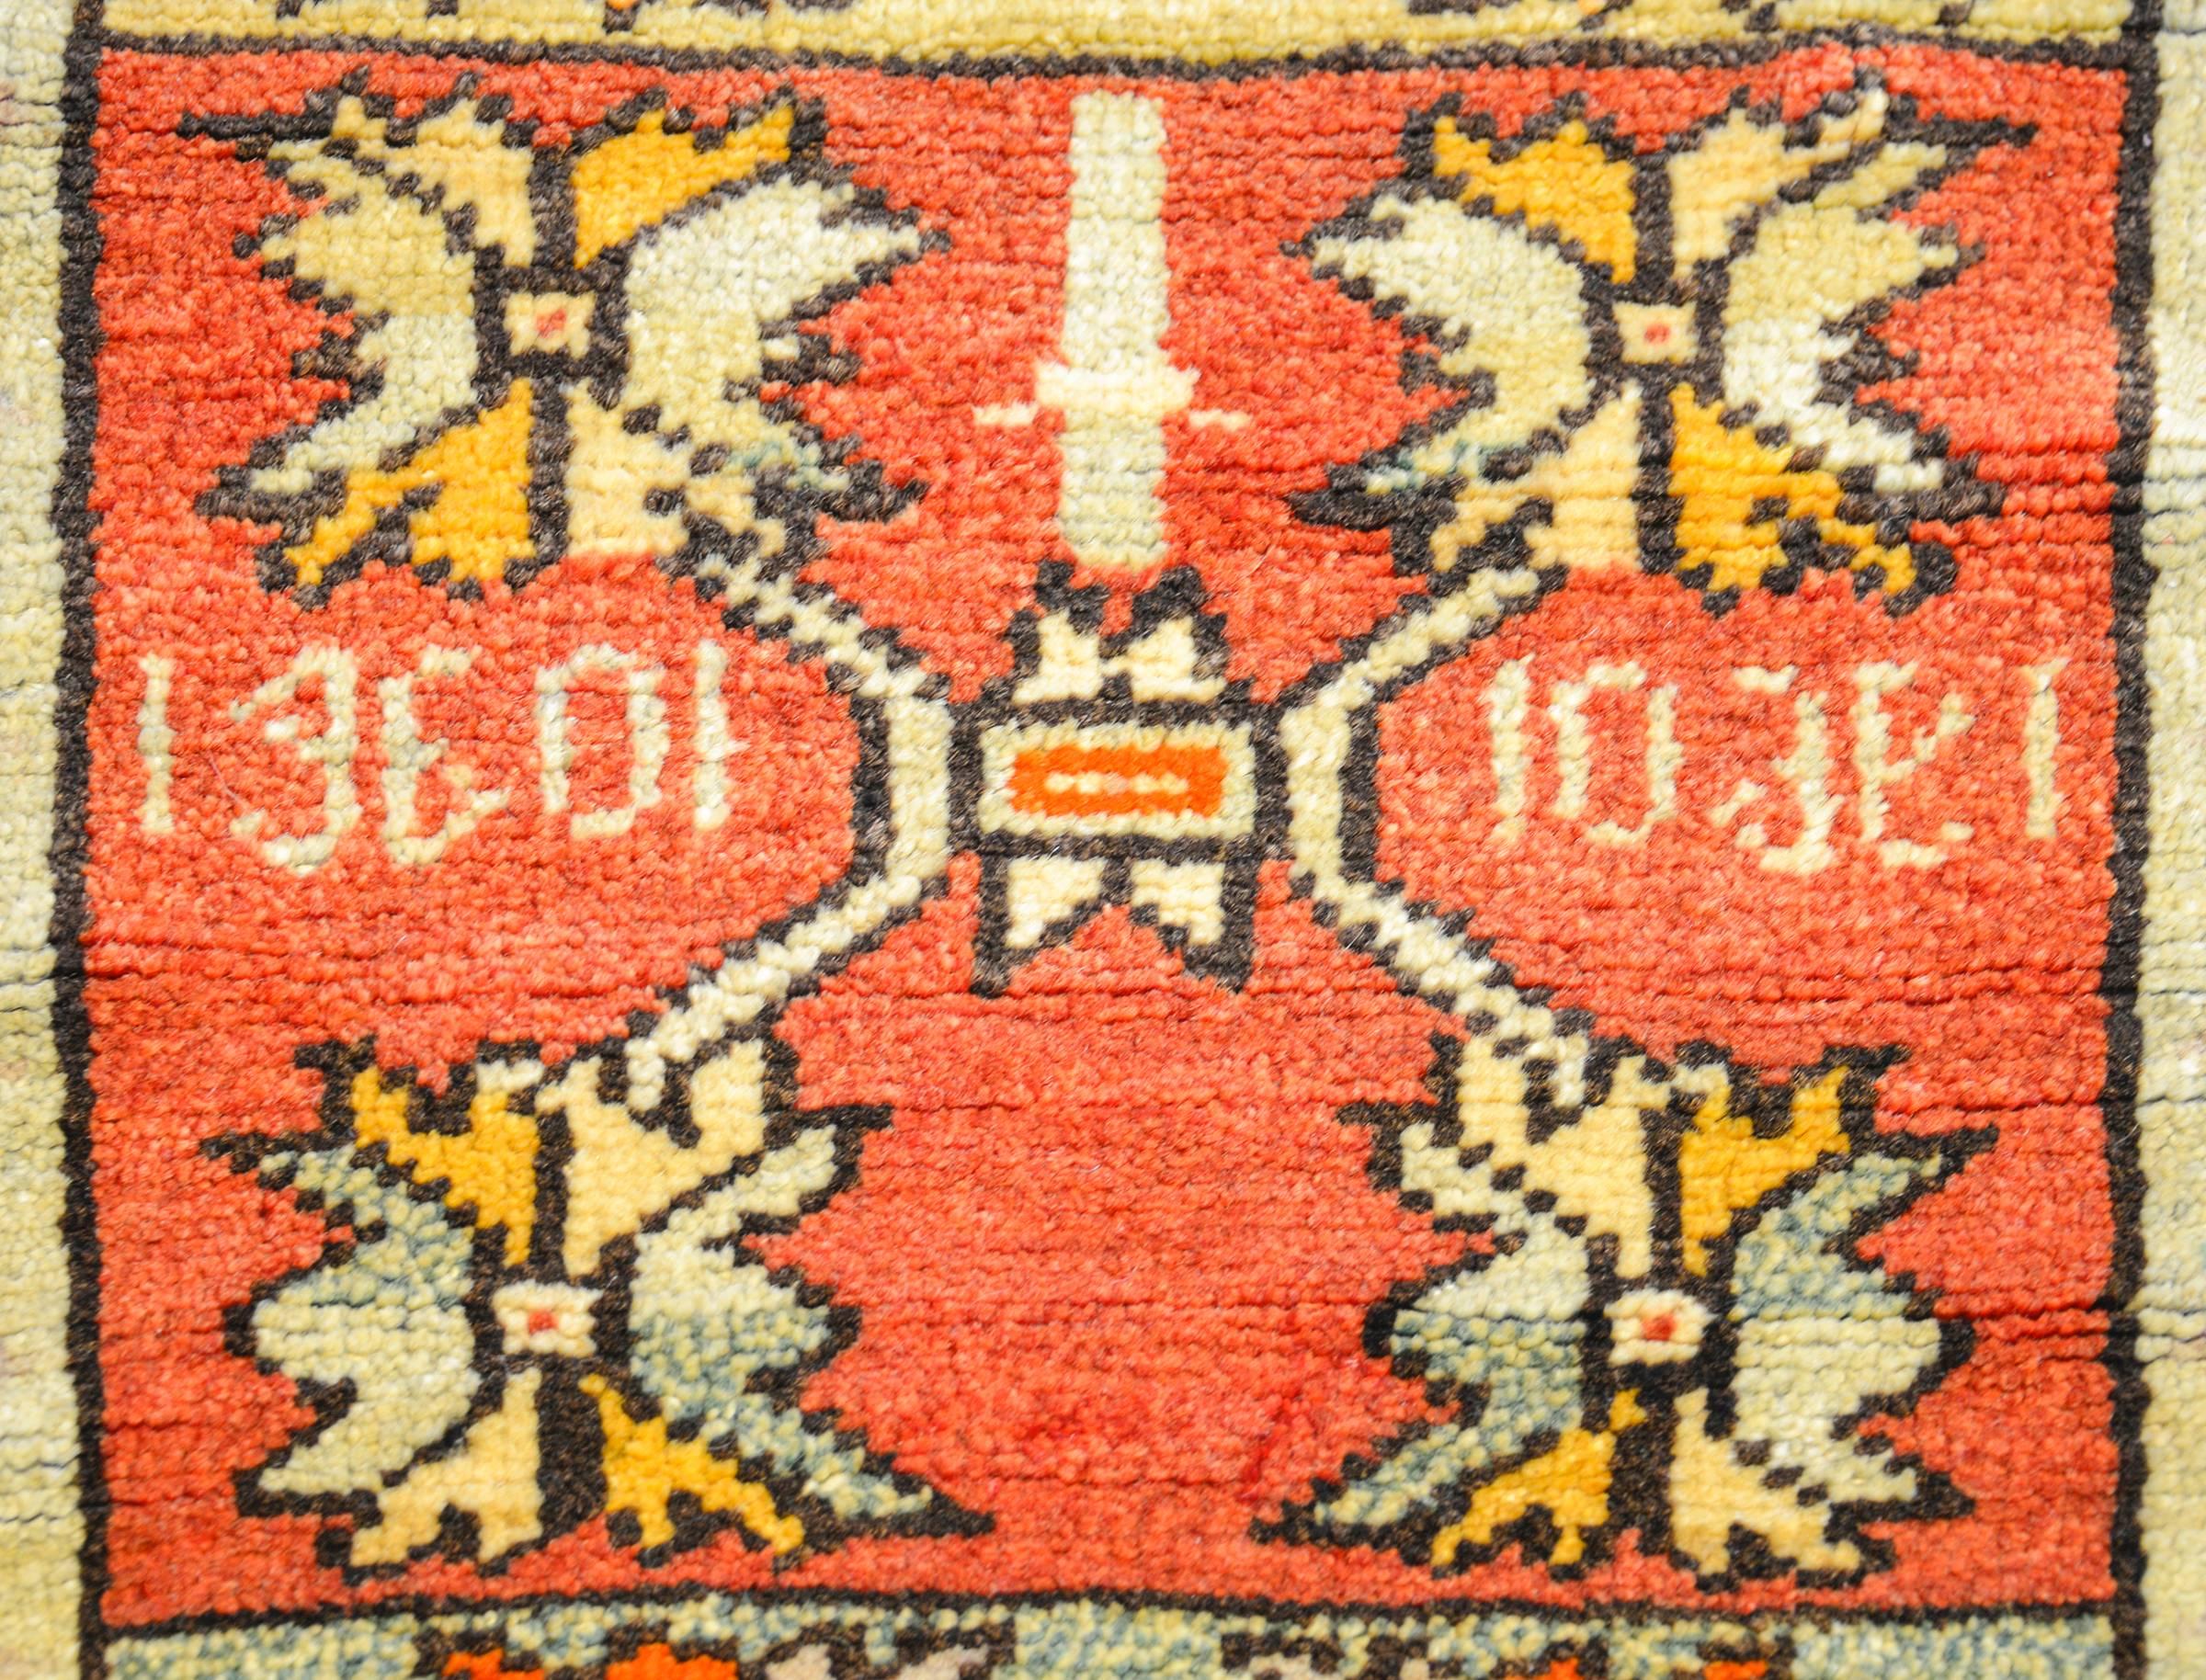 A sweet early 20th century Turkish rug with a three floral sections, one with an indigo background, one with a crimson background, and one with a pale green background. All three have the same floral motif. The border is geometric with multicolored